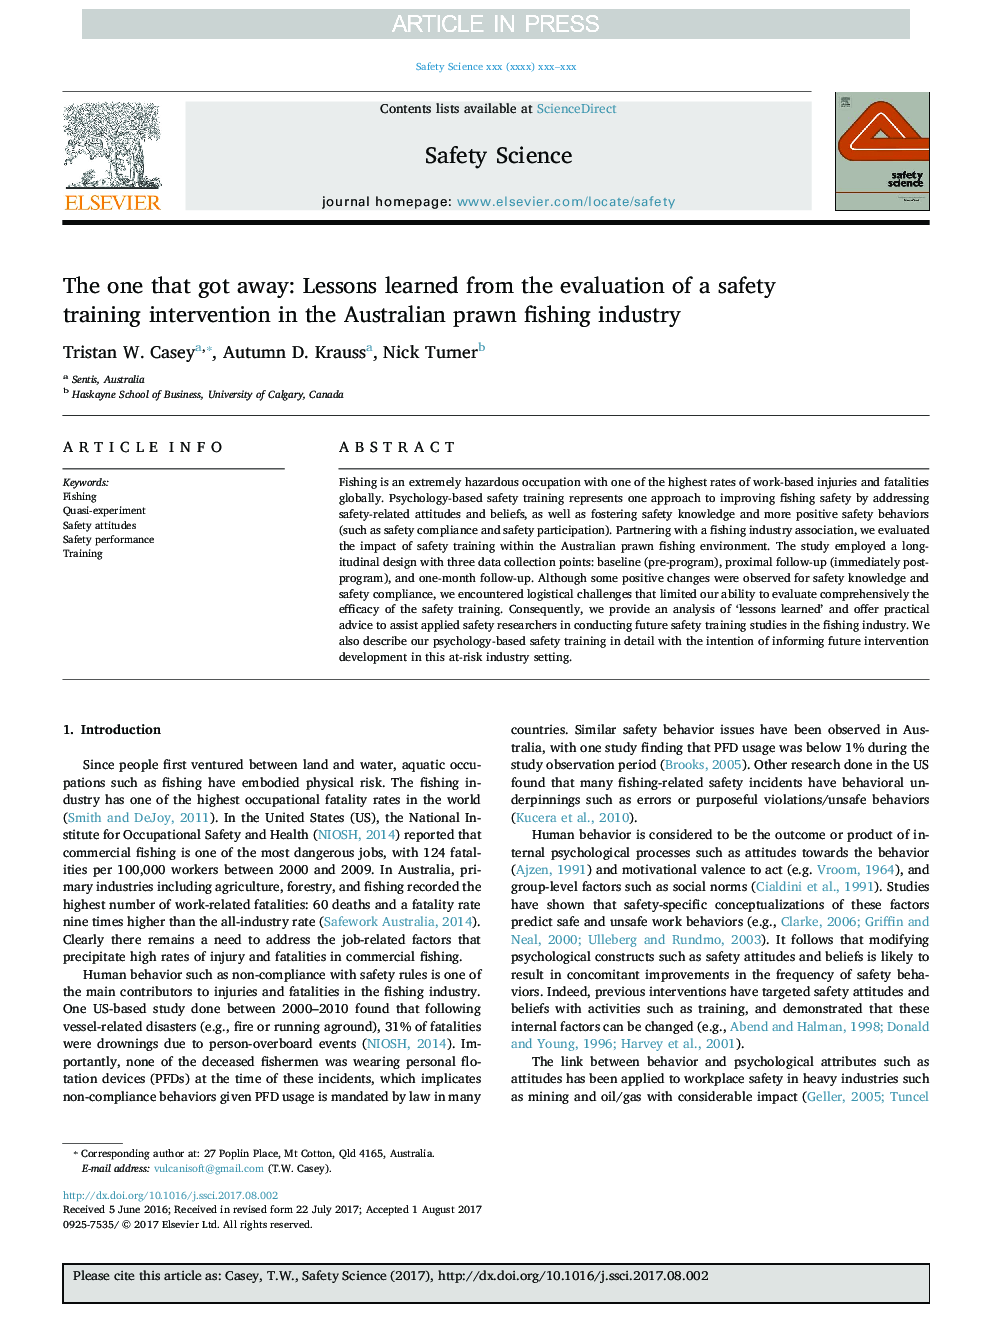 The one that got away: Lessons learned from the evaluation of a safety training intervention in the Australian prawn fishing industry